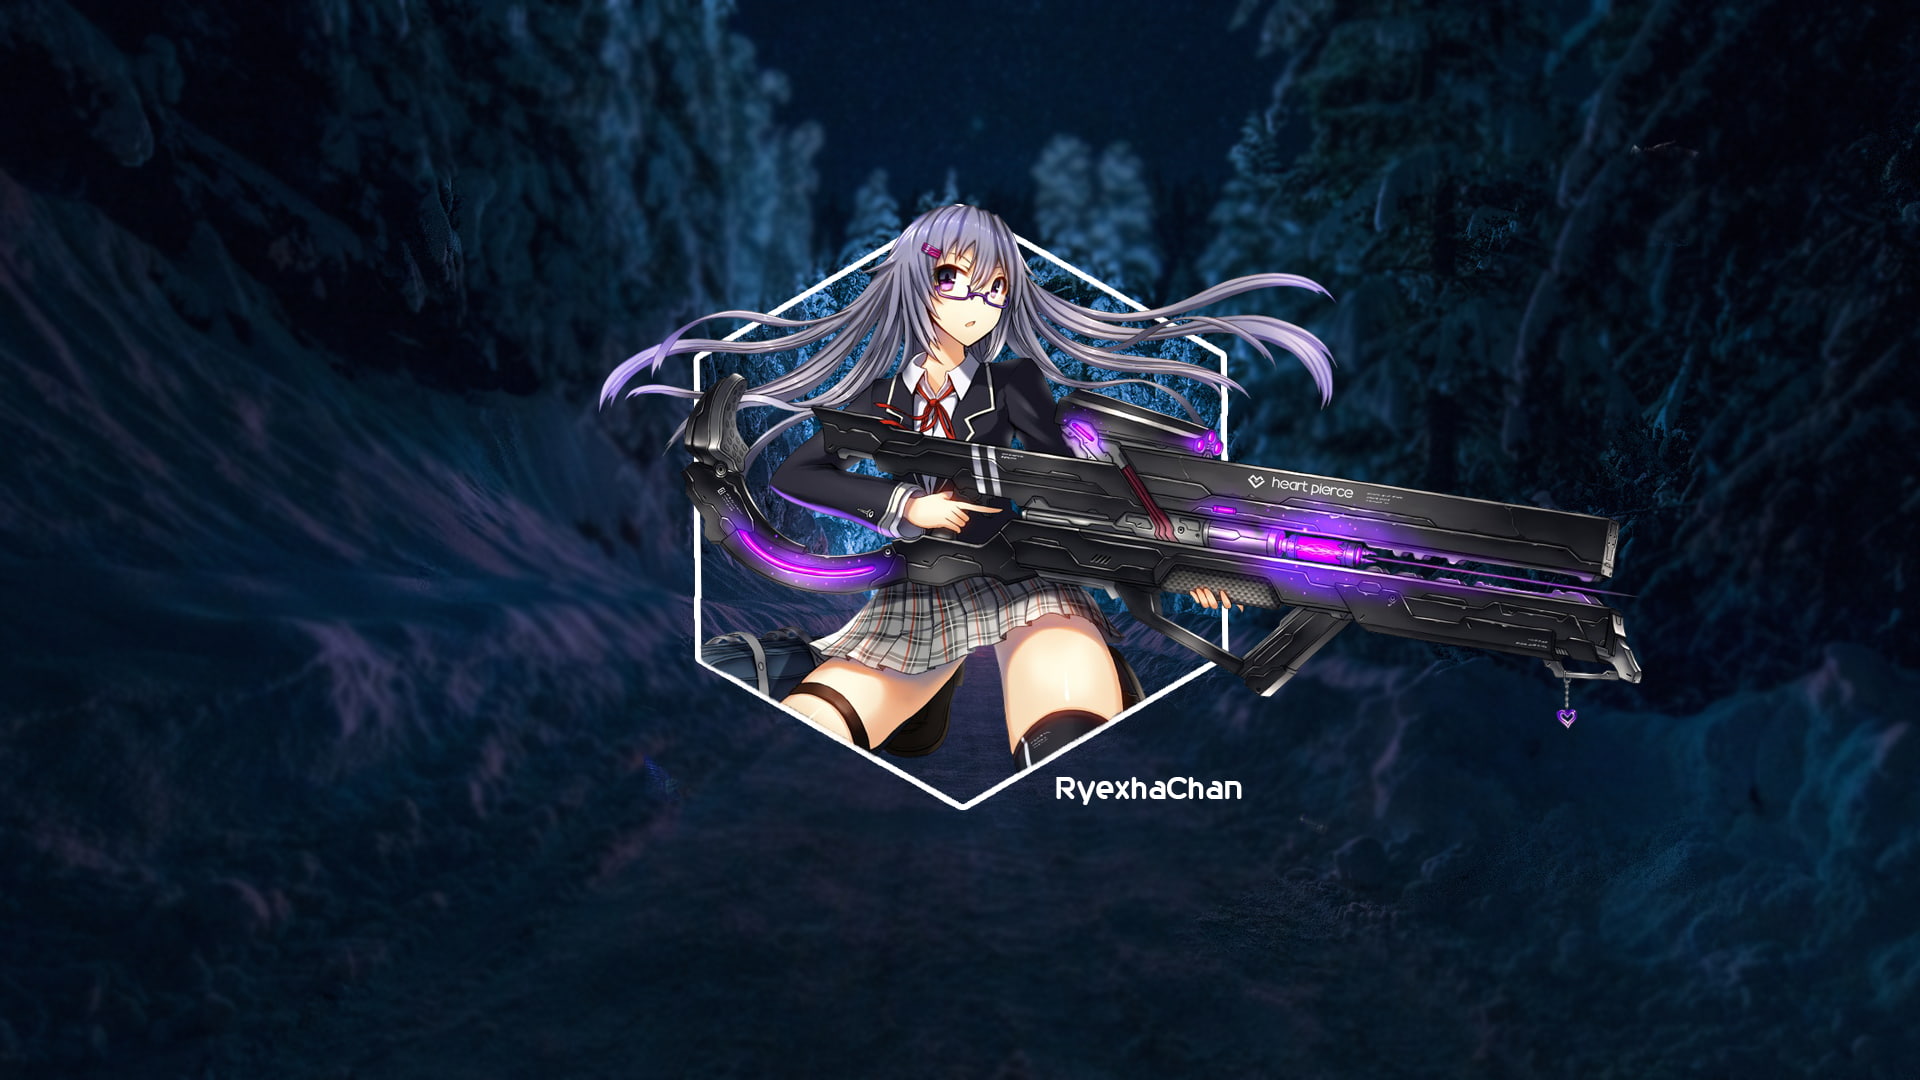 anime girls, Girl With Weapon, one person, nature, illuminated